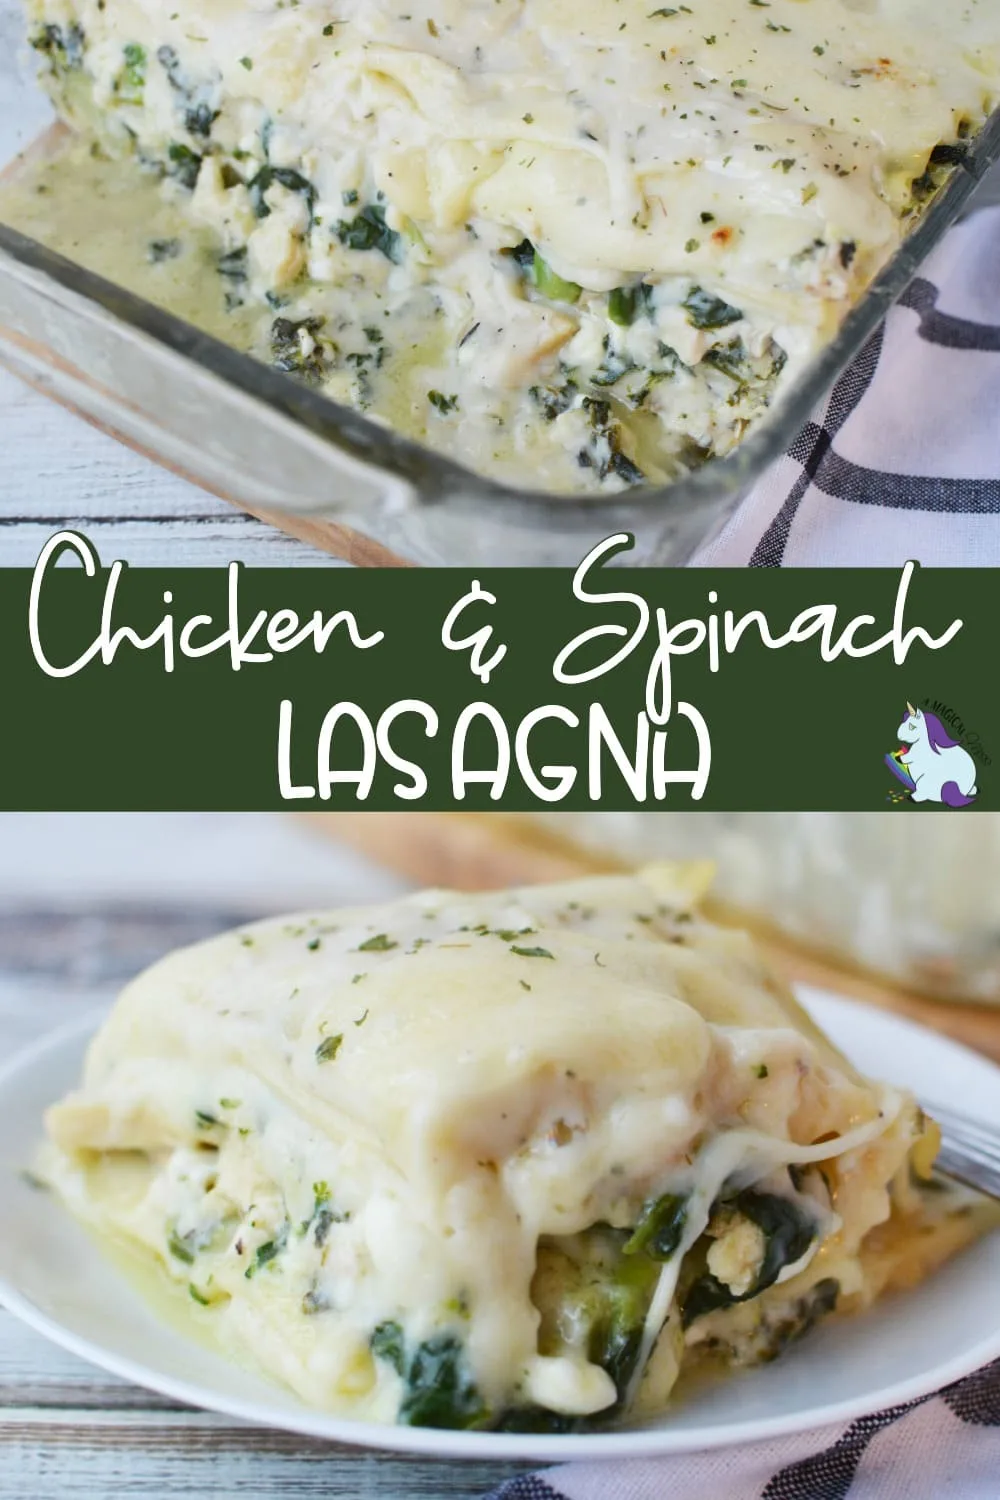 Spinach lasagna in a ban and on a plate